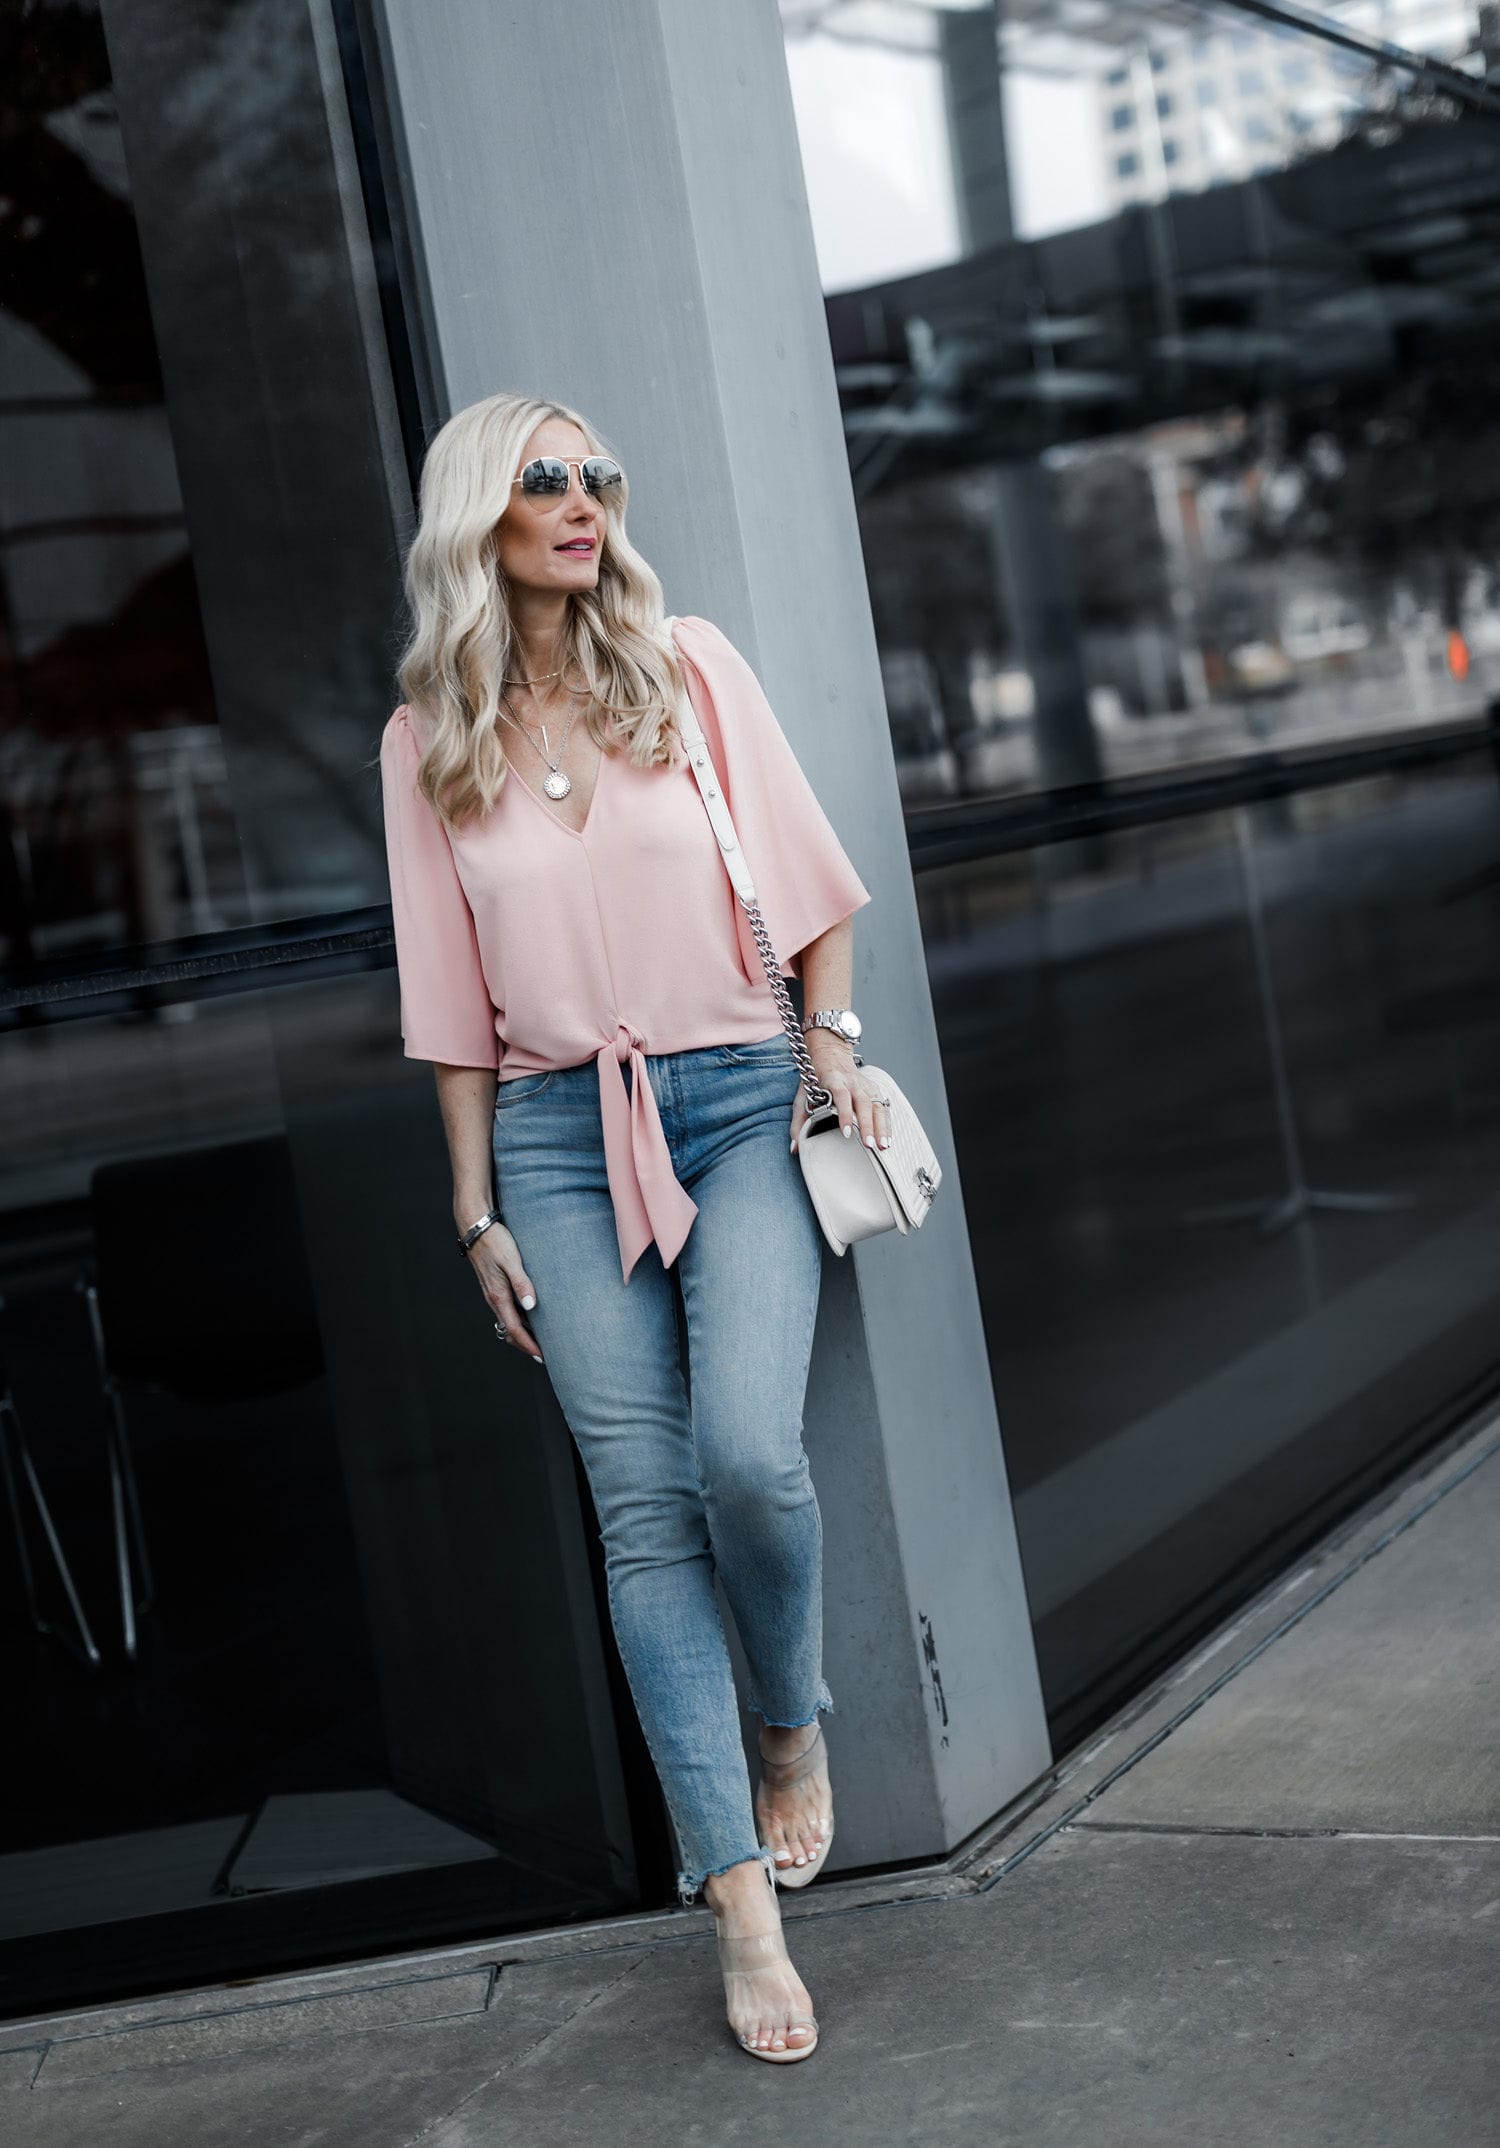 Dallas style blogger wearing Mother denim jeans and pink sprint top